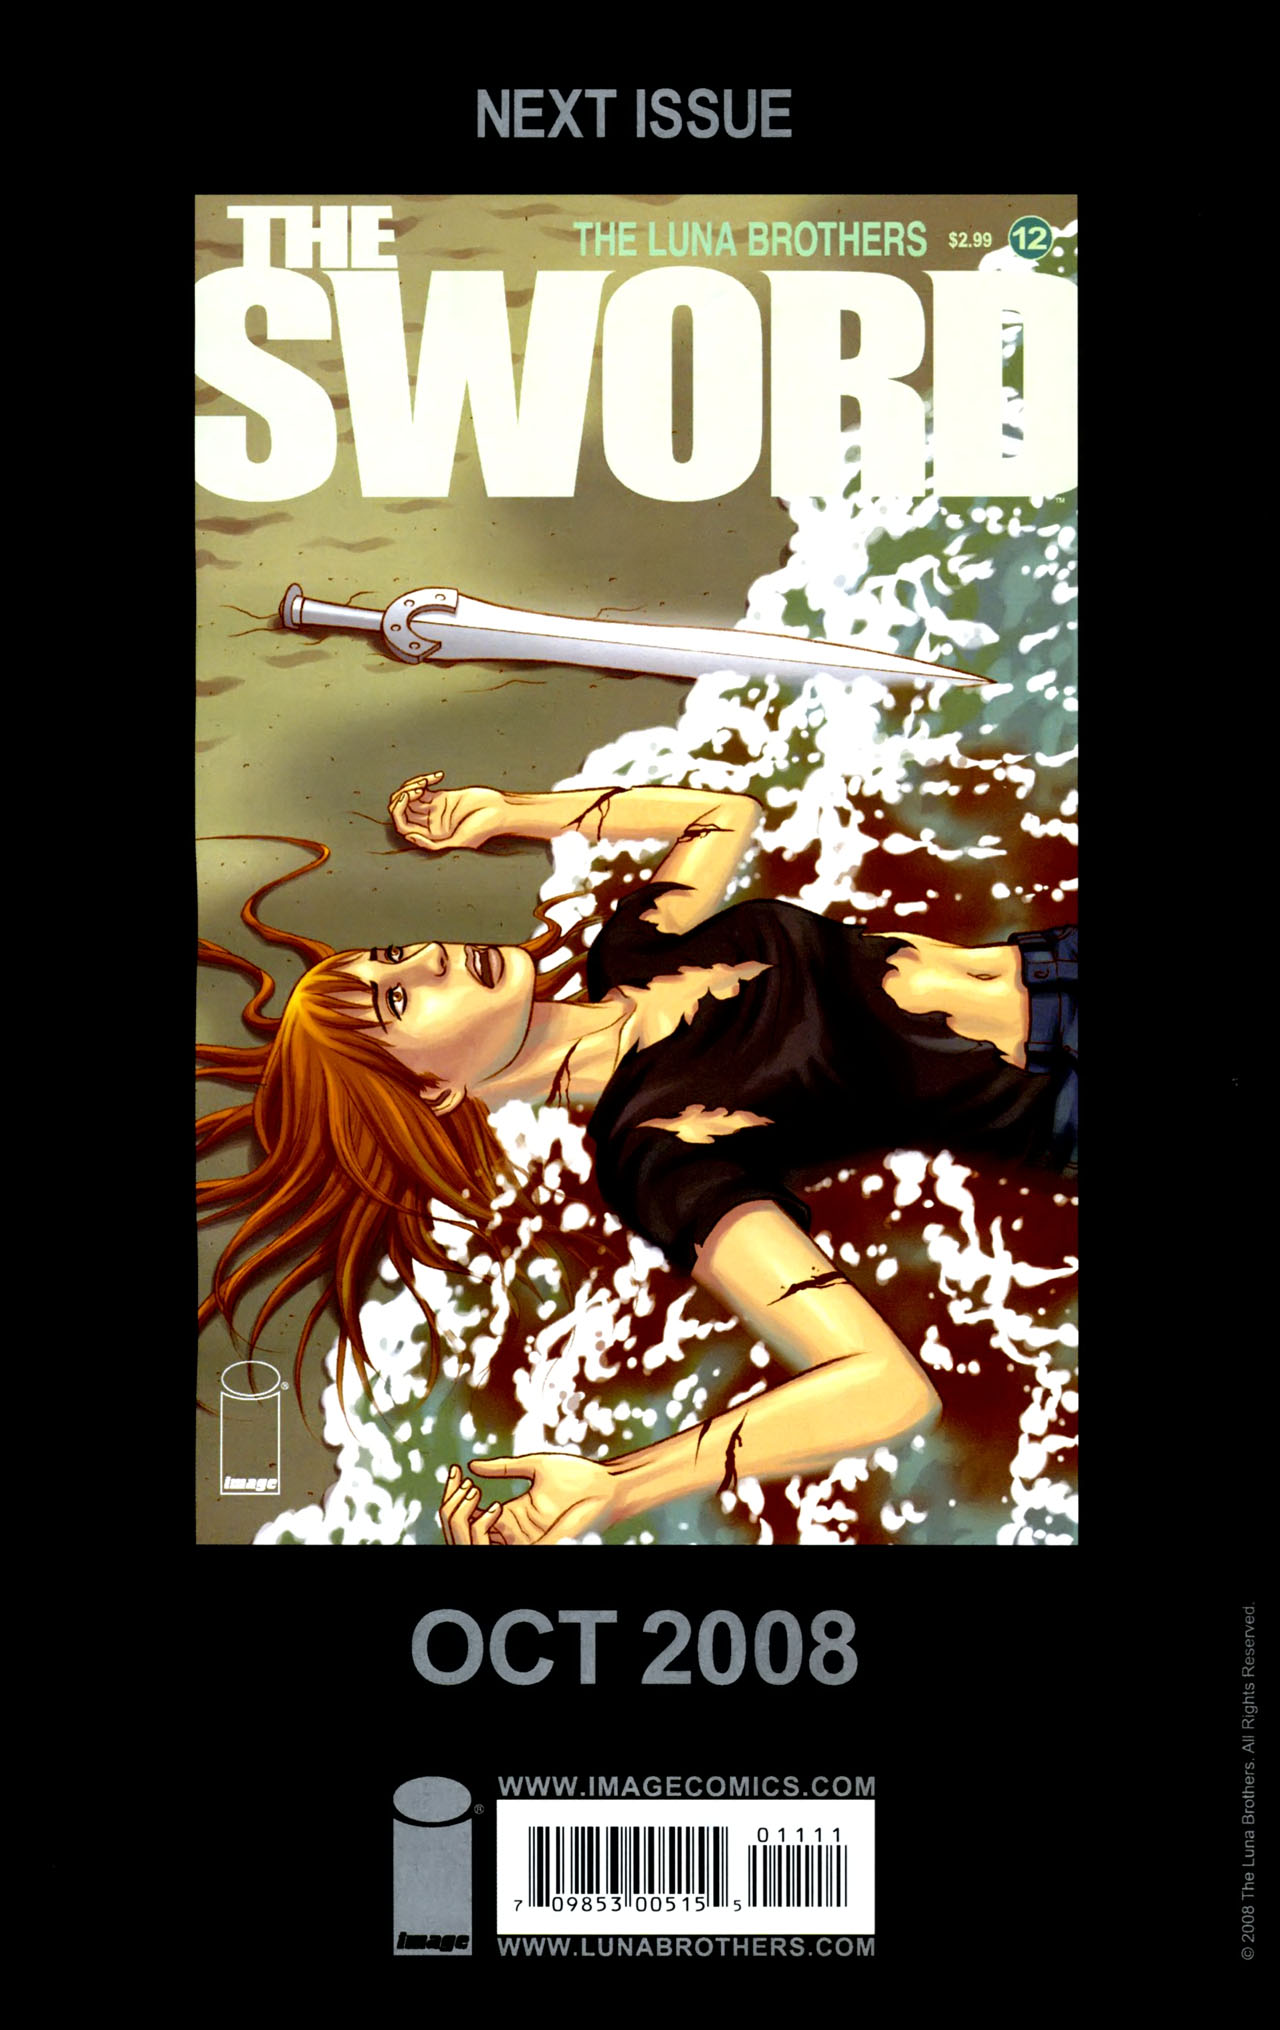 sword - Next Issue The Luna Brothers $2.99 12. Swor! Ii 01.1.1.1. 2008 The Luna Brothers. All Rights Reserved. 7 Iii 985311005 1511 Lg